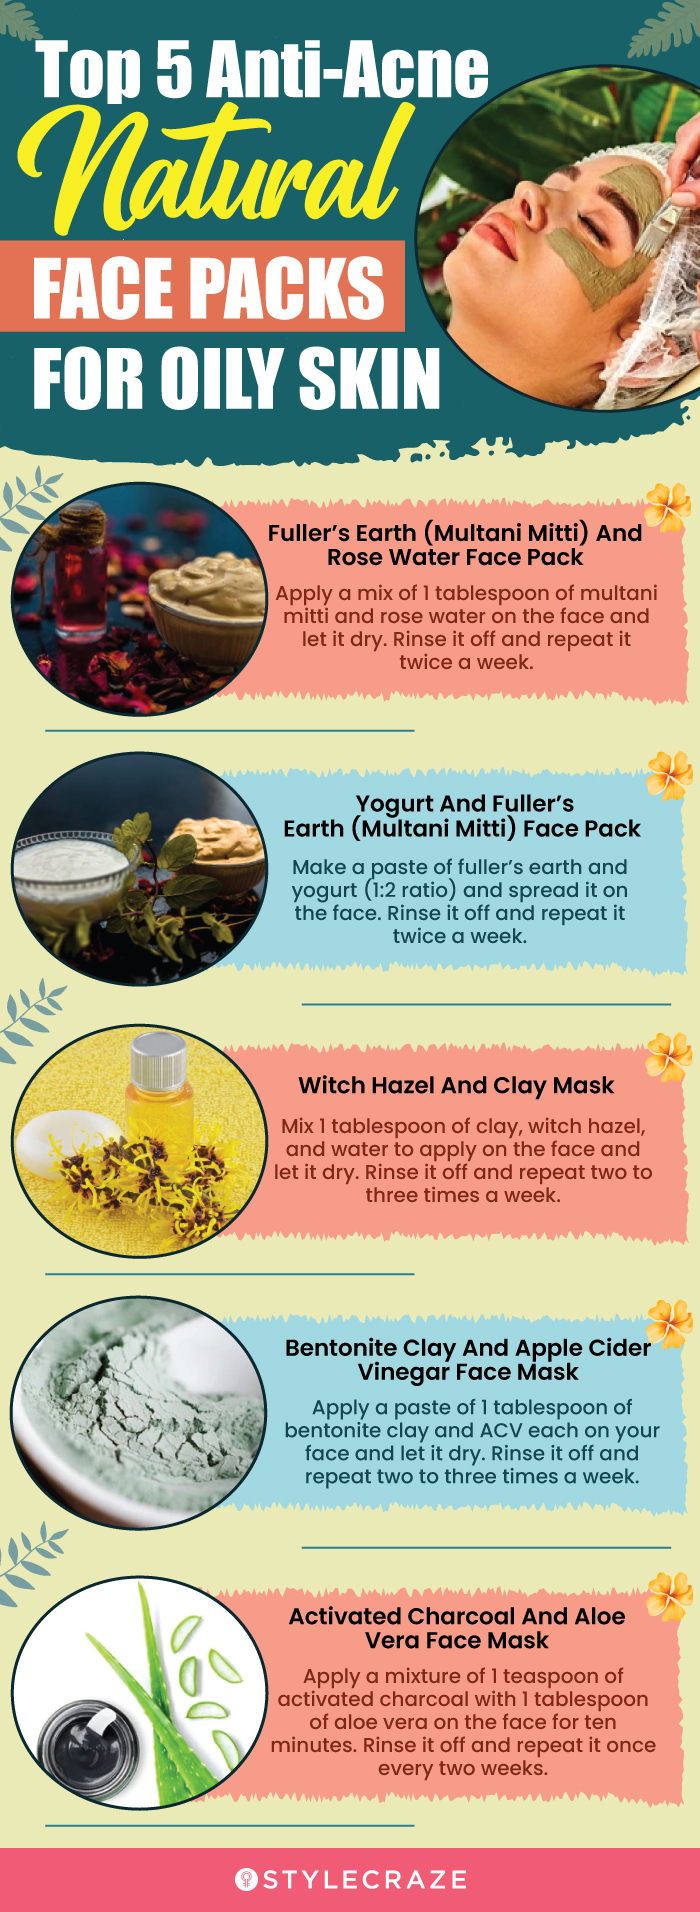 top 5 anti-acne natural face packs for oily skin [infographic]